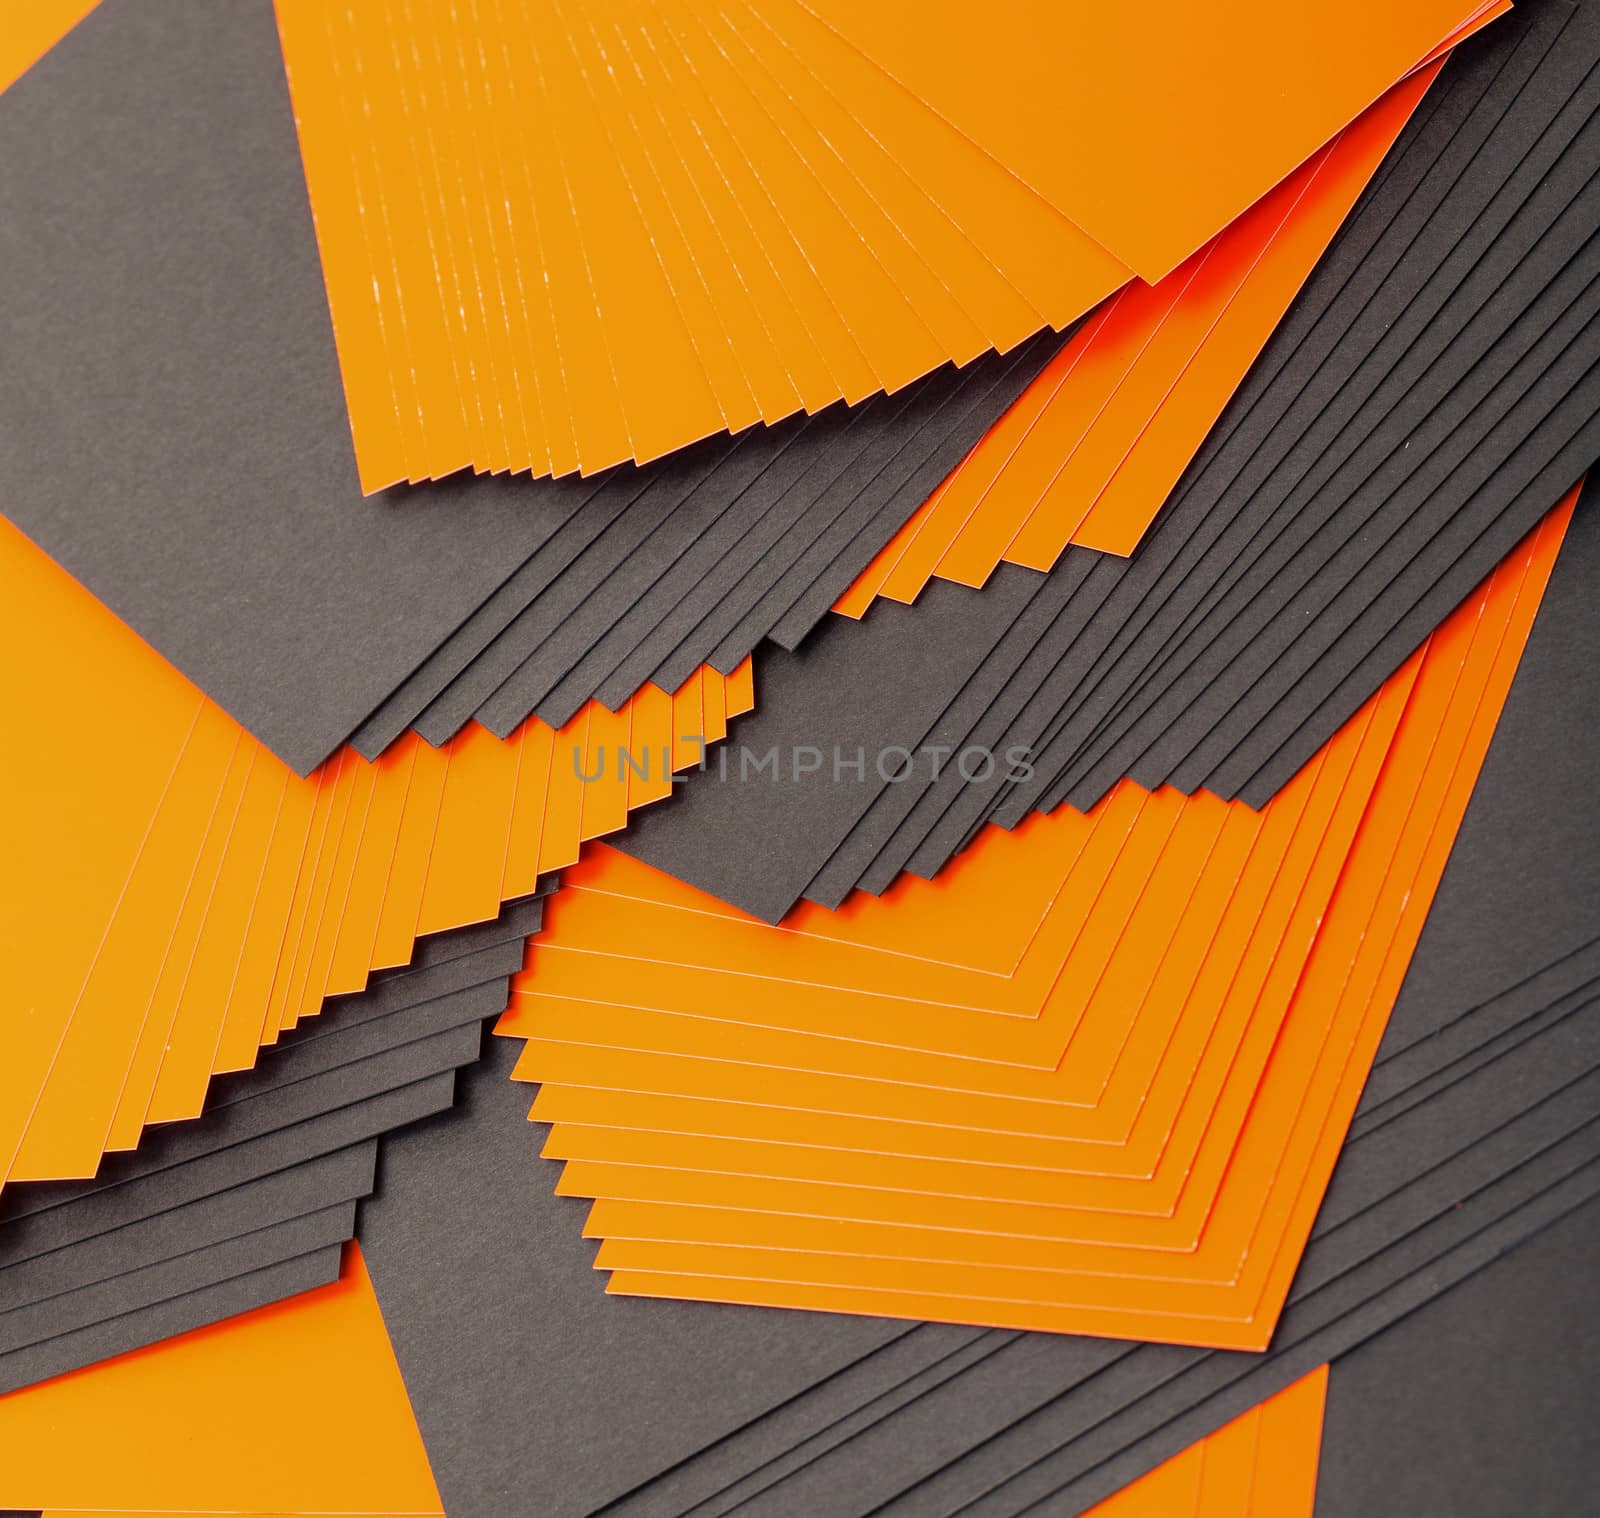 Black and orange sheets paper by Discovod